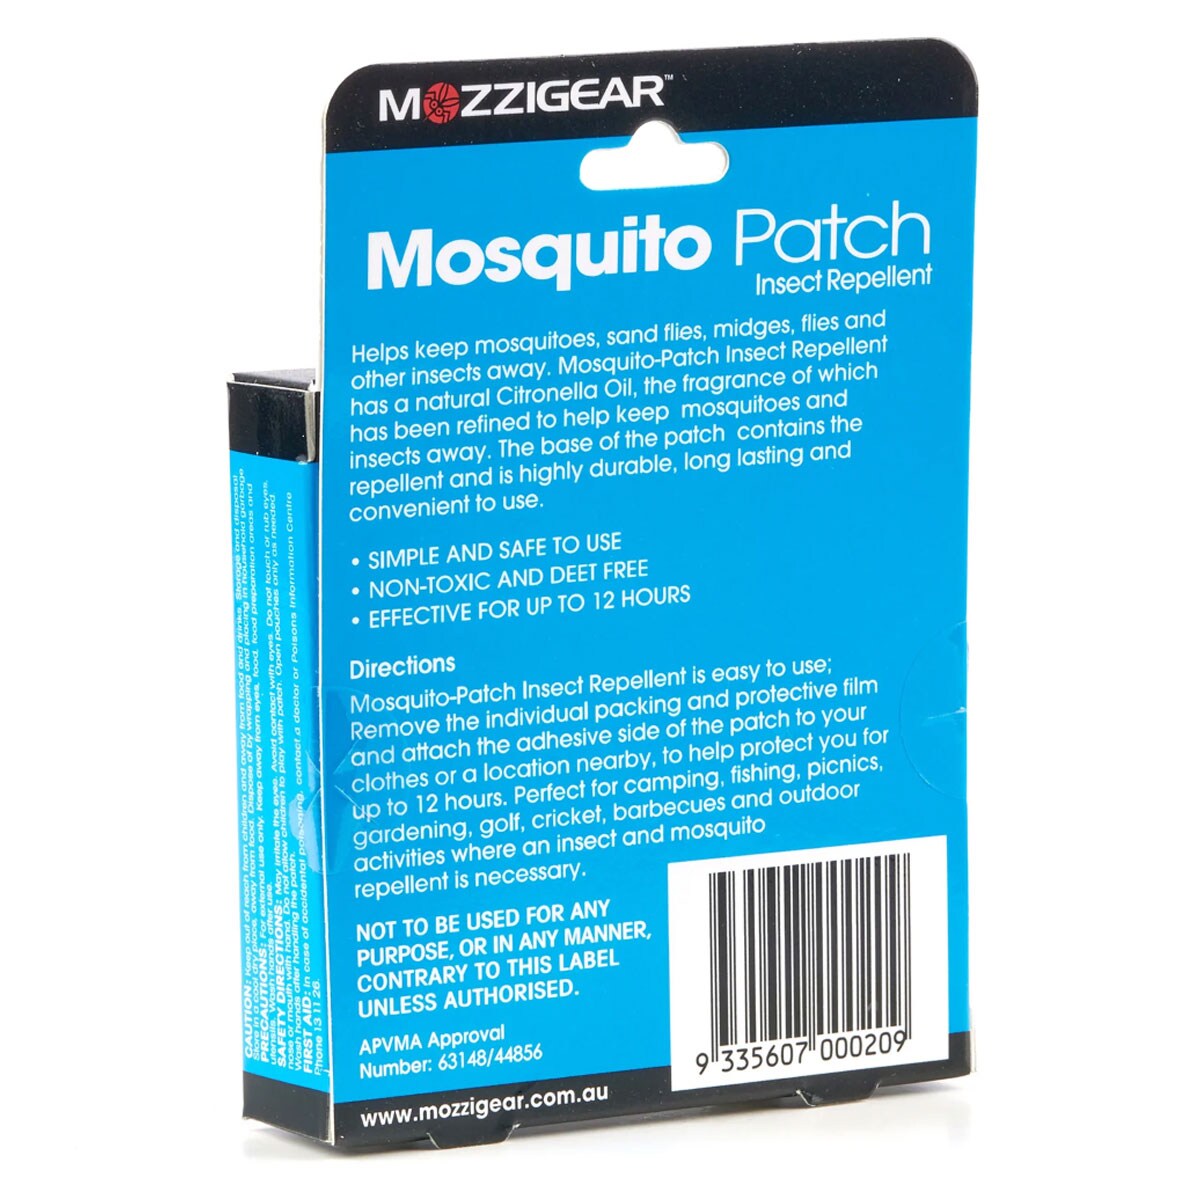 Mozzigear Mosquito Patch 10 Pack